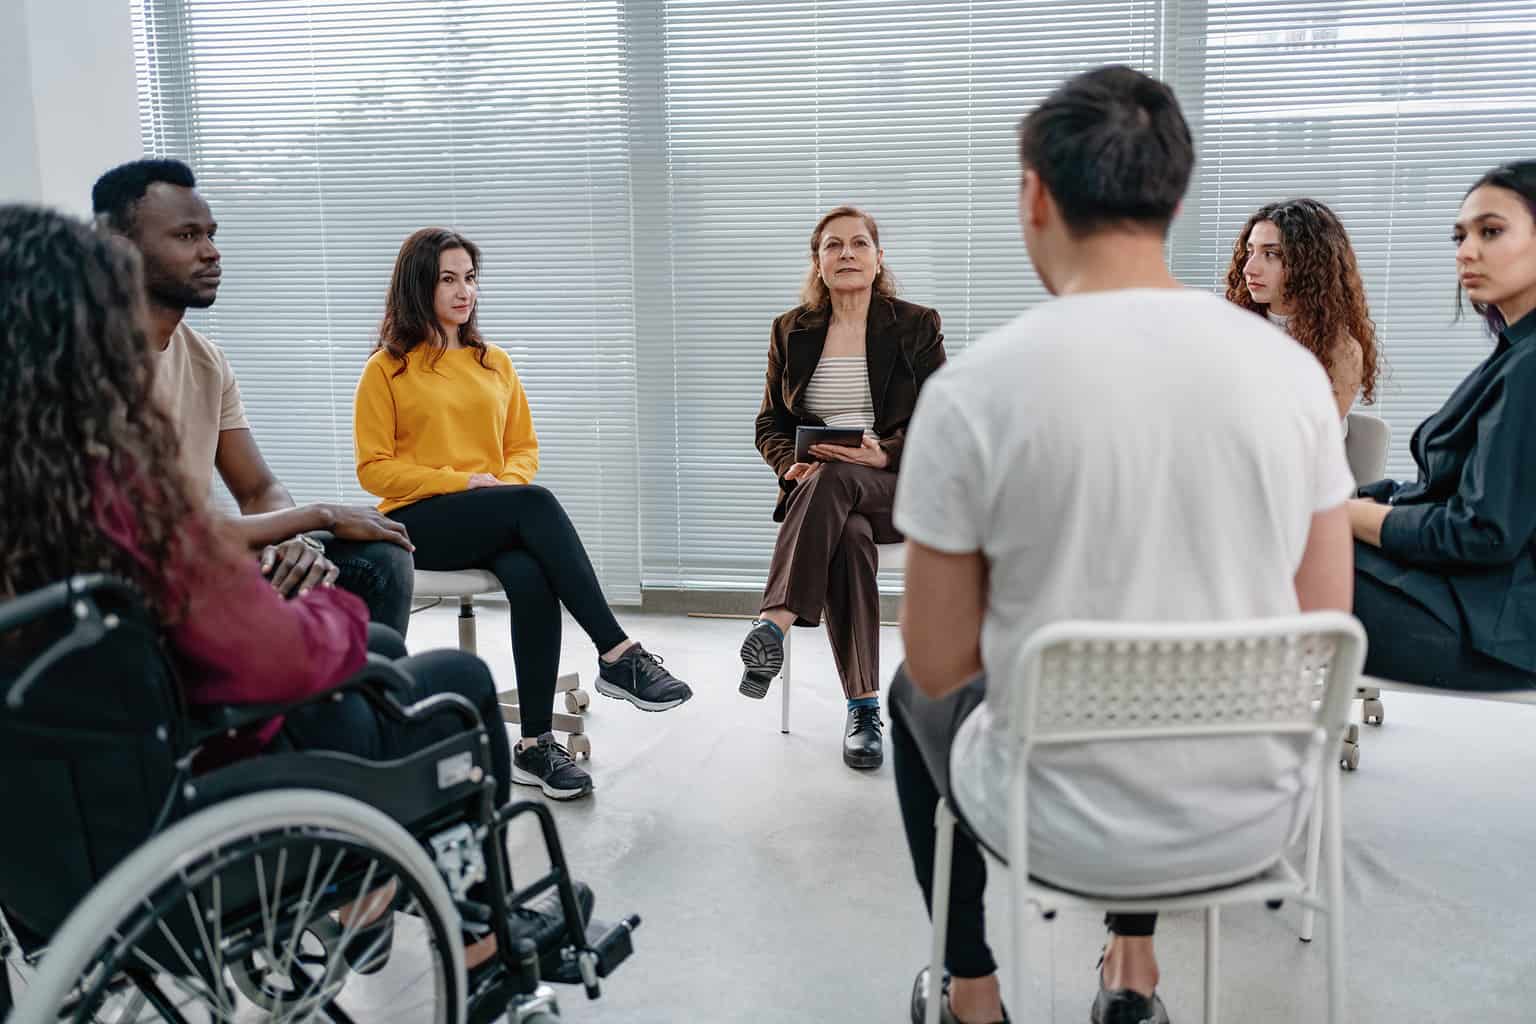 Group Therapy with young girl in Wheelchair